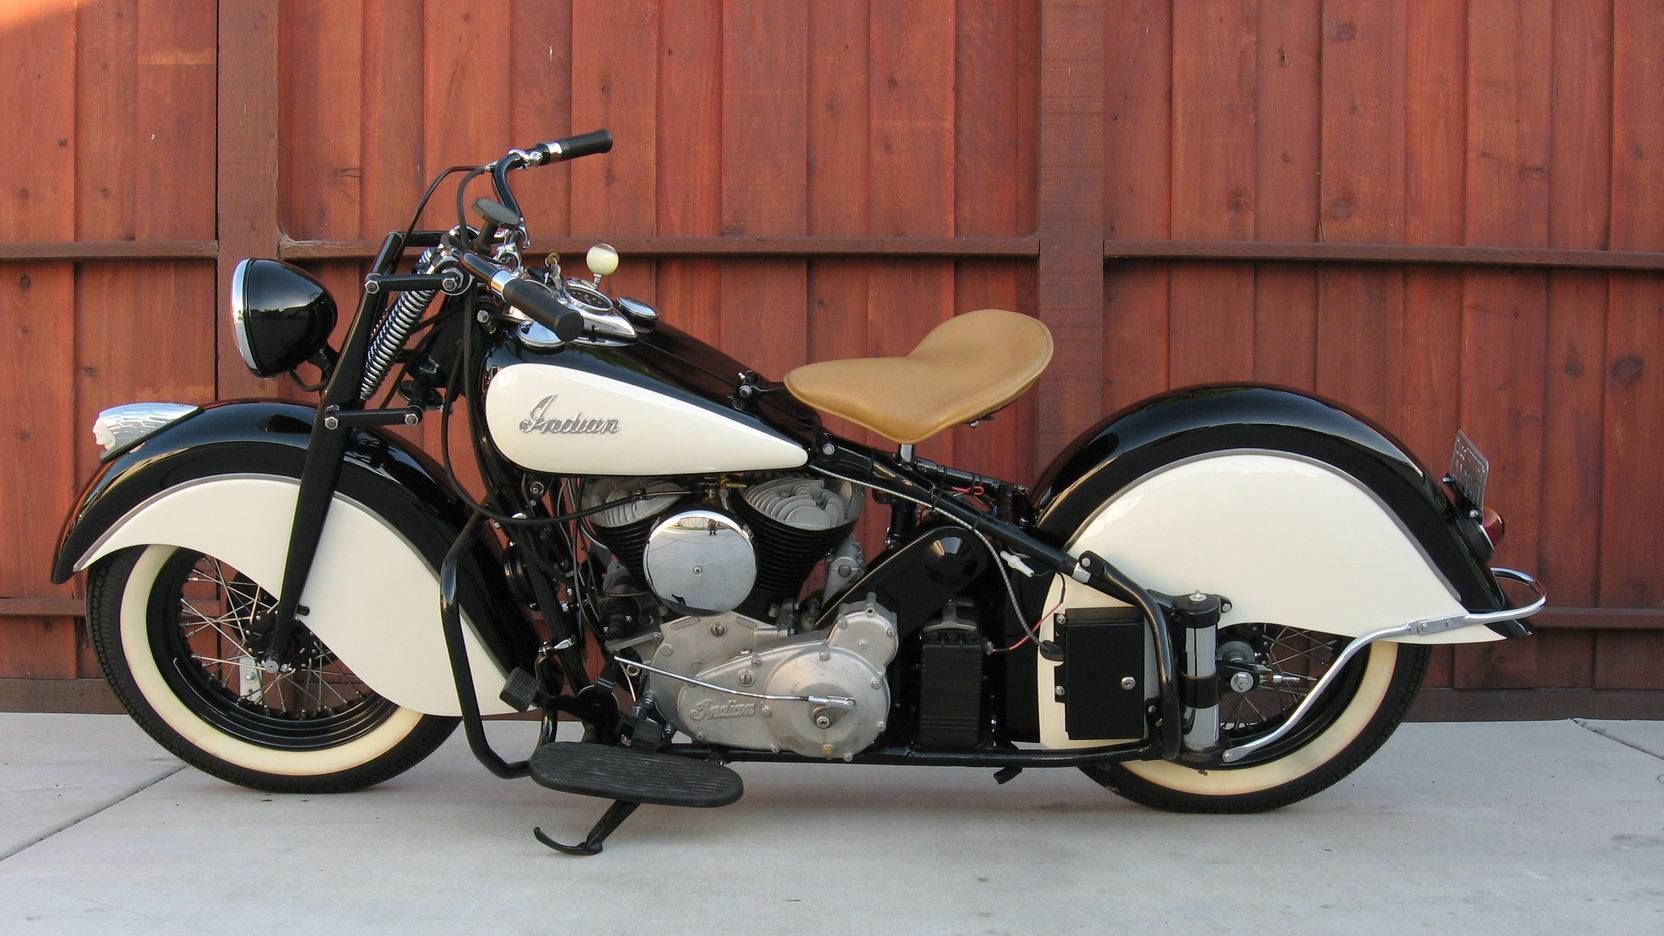 1947 Indian Chief in immaculate condition